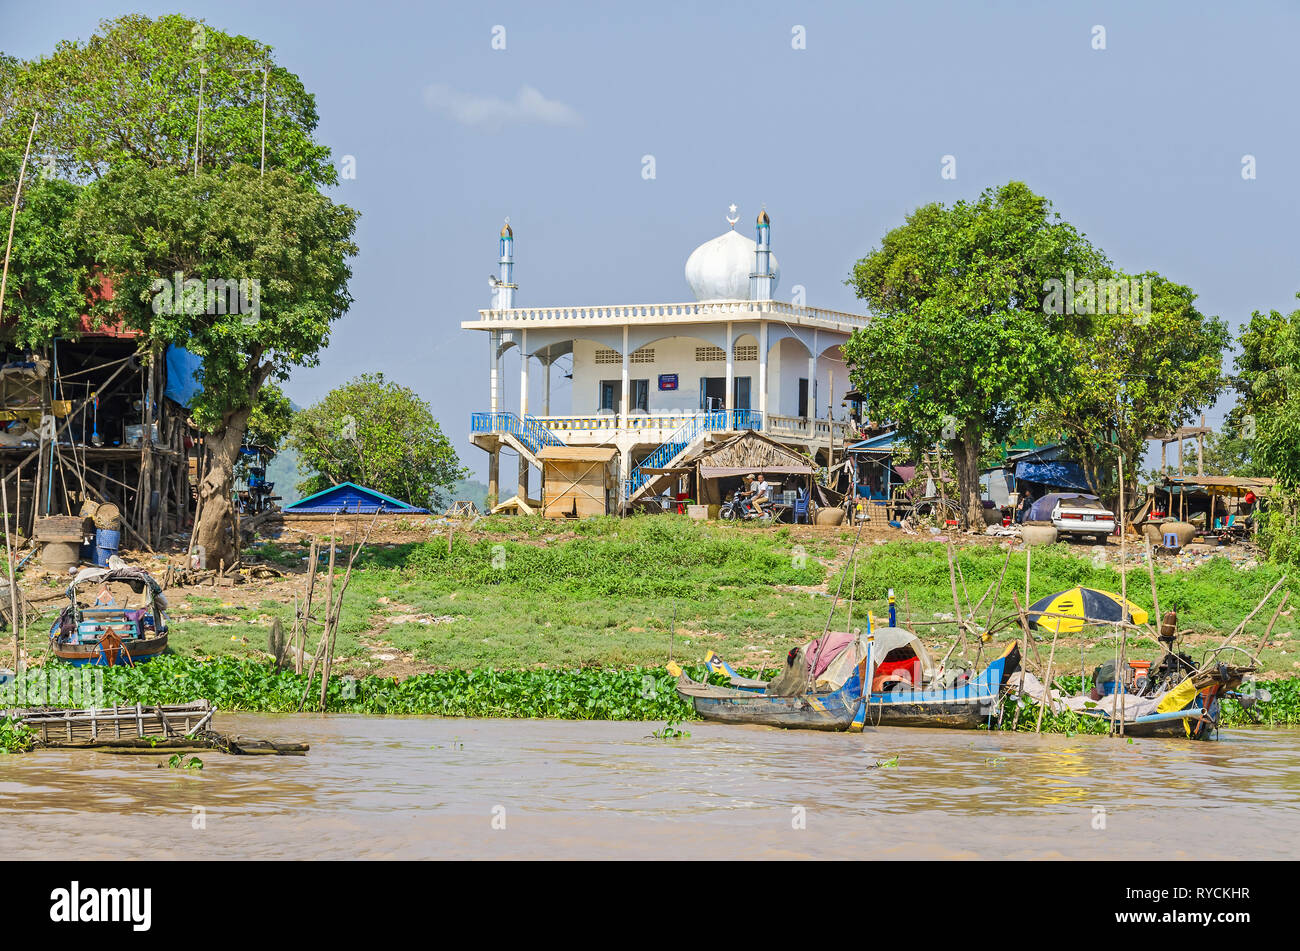 Kampong Chhnang, Cambodia - April 11, 2018: Mosque in one of the small villages near the Kampong Chhnang City on a banks of the Tonle Sap Lake covered Stock Photo